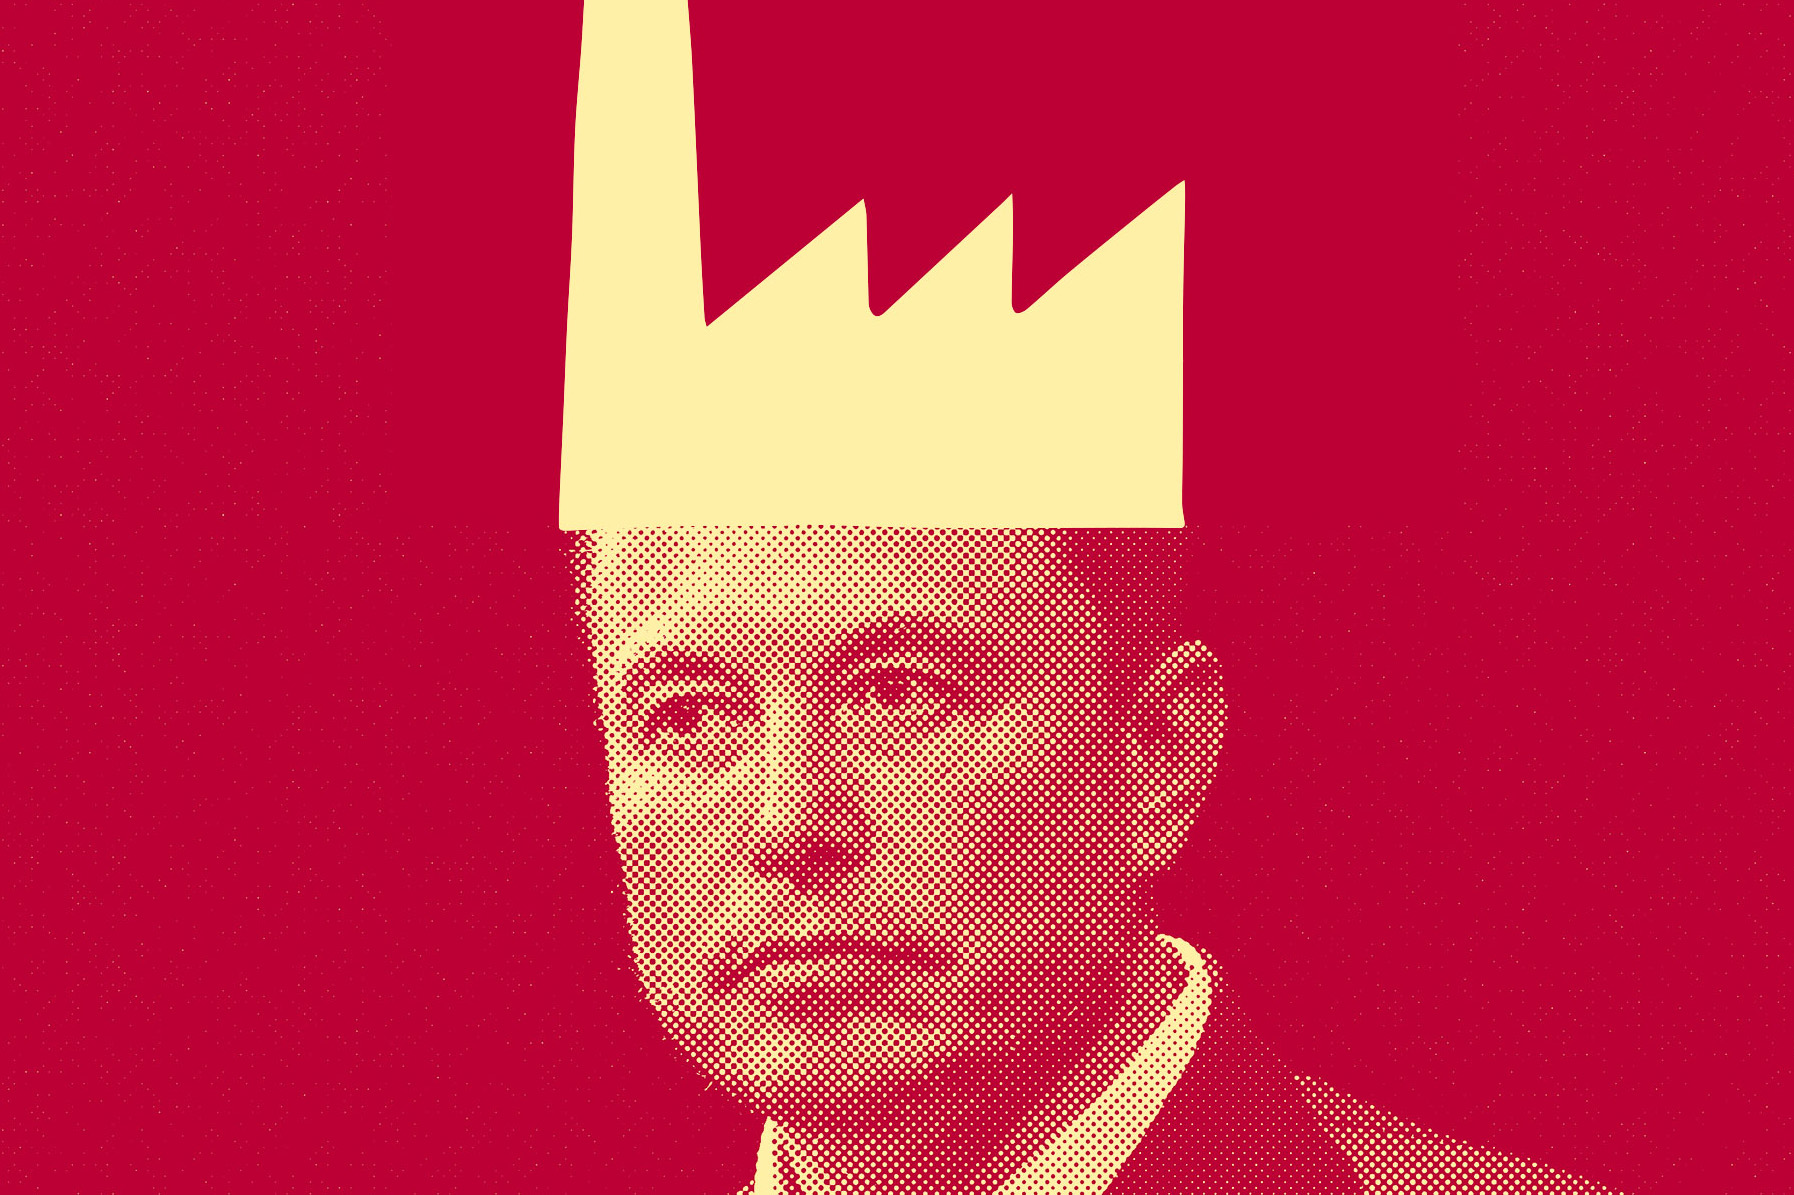 The Musk Industrial Complex